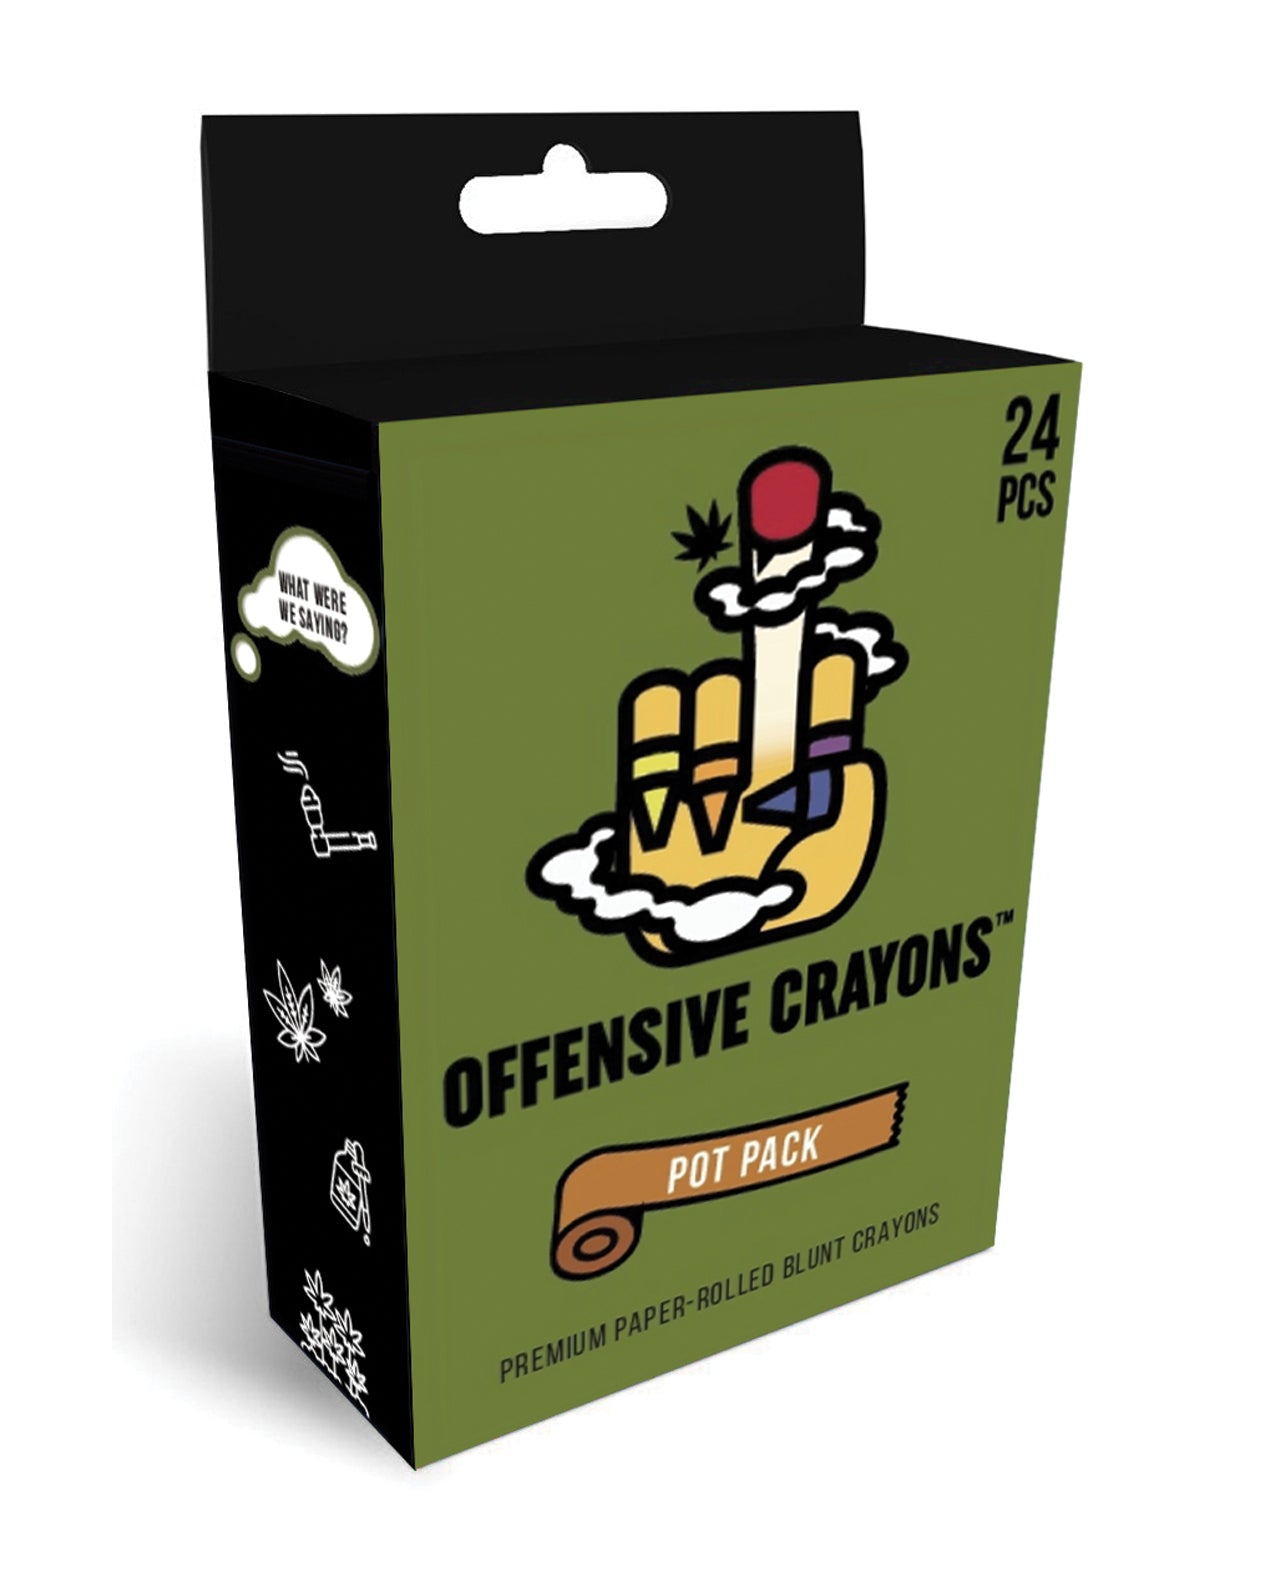 Shop for the Wood Rocket Offensive Crayons Pot Pac at My Ruby Lips